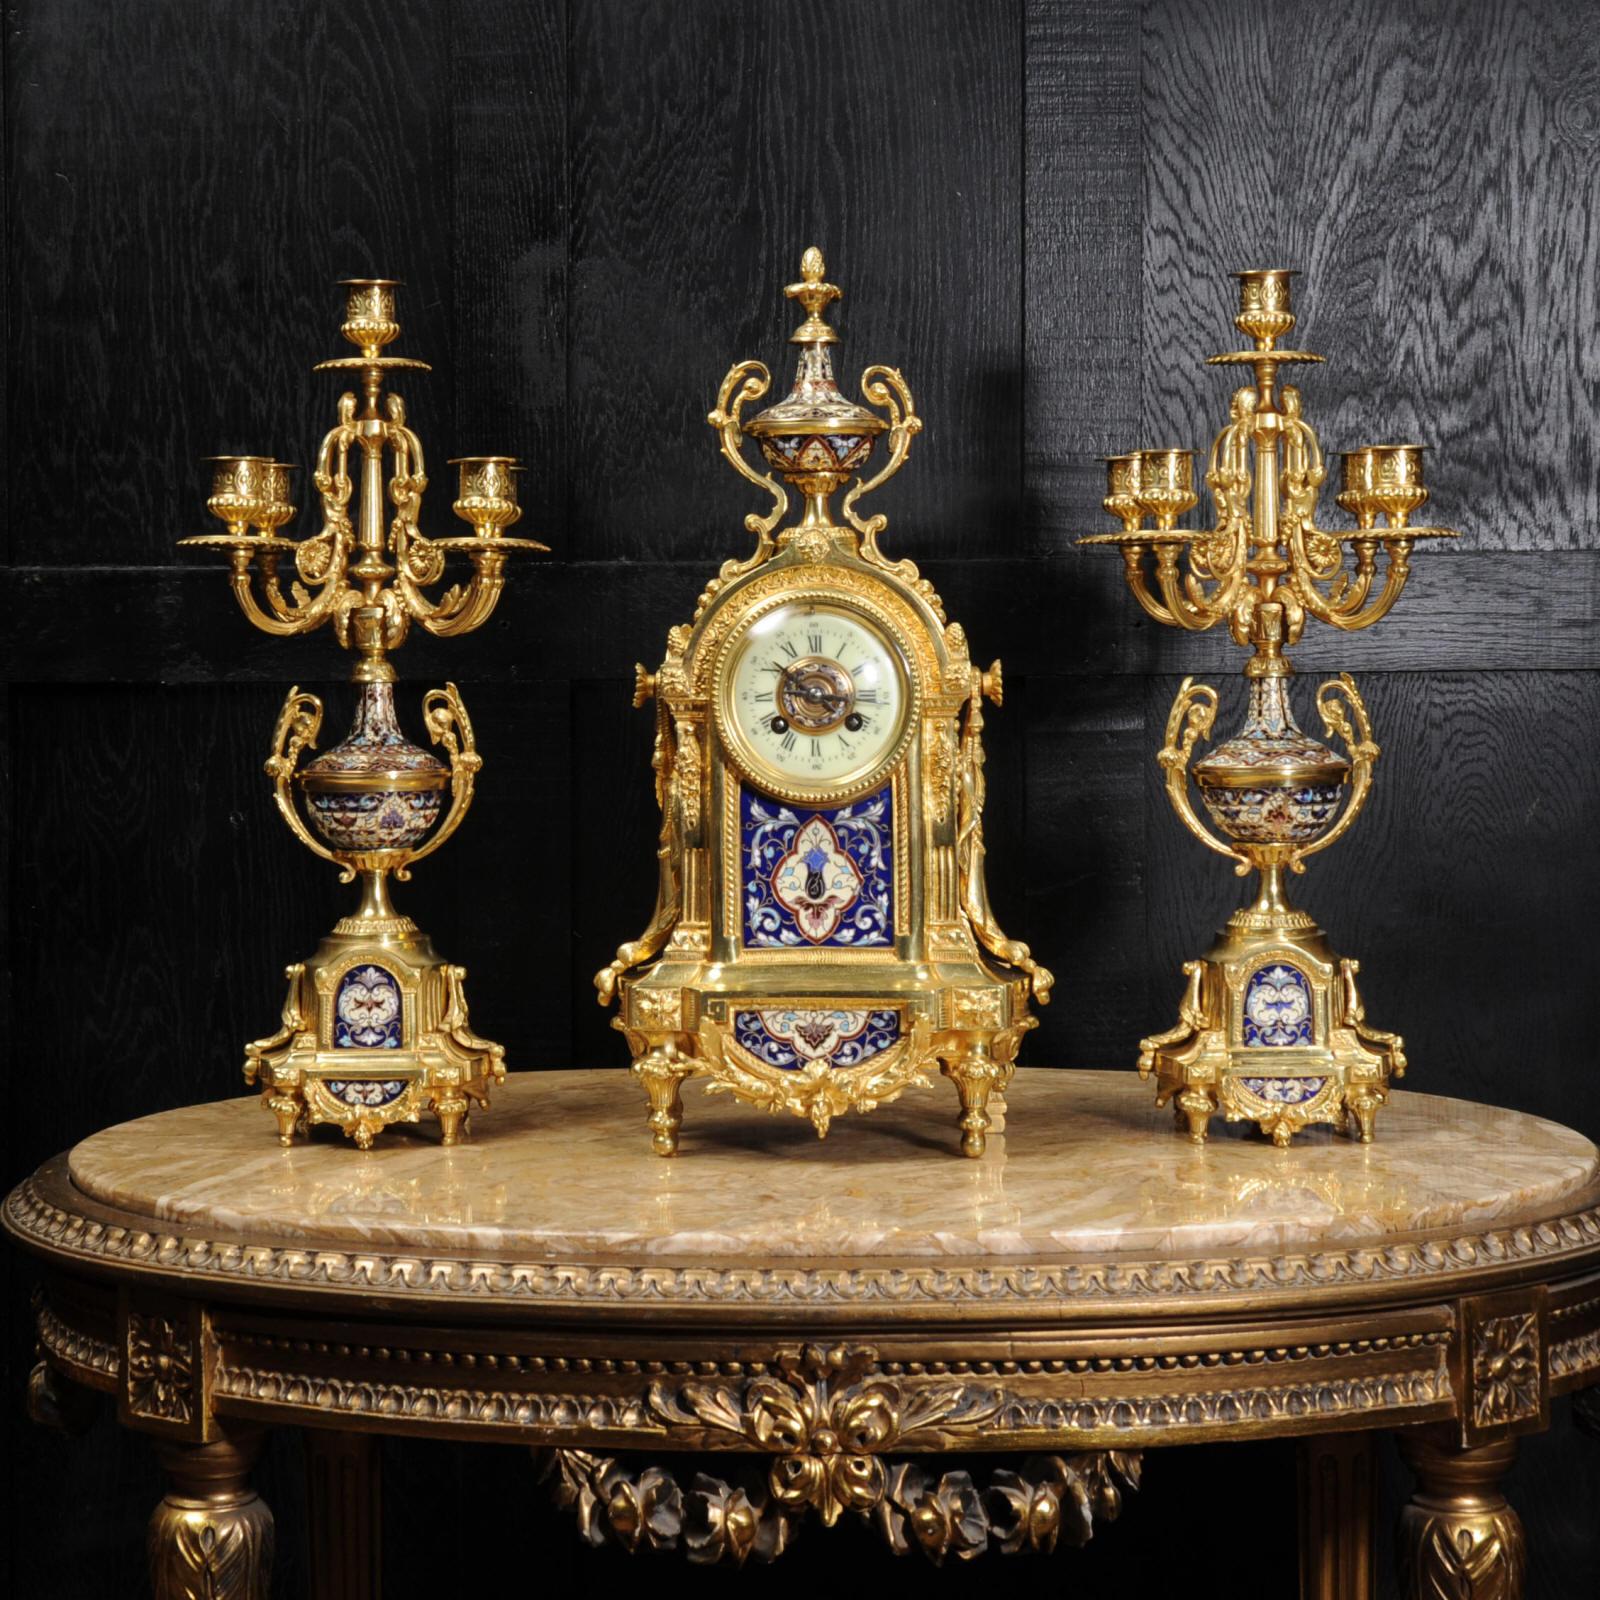 A rare and stunning original antique French clock set by A.D. Mougin. It is beautifully modelled in ormolu (finely gilded bronze) and mounted with exquisite cloisonné or champlevé enamel work. It is in the classical style of Louis XVI with floral